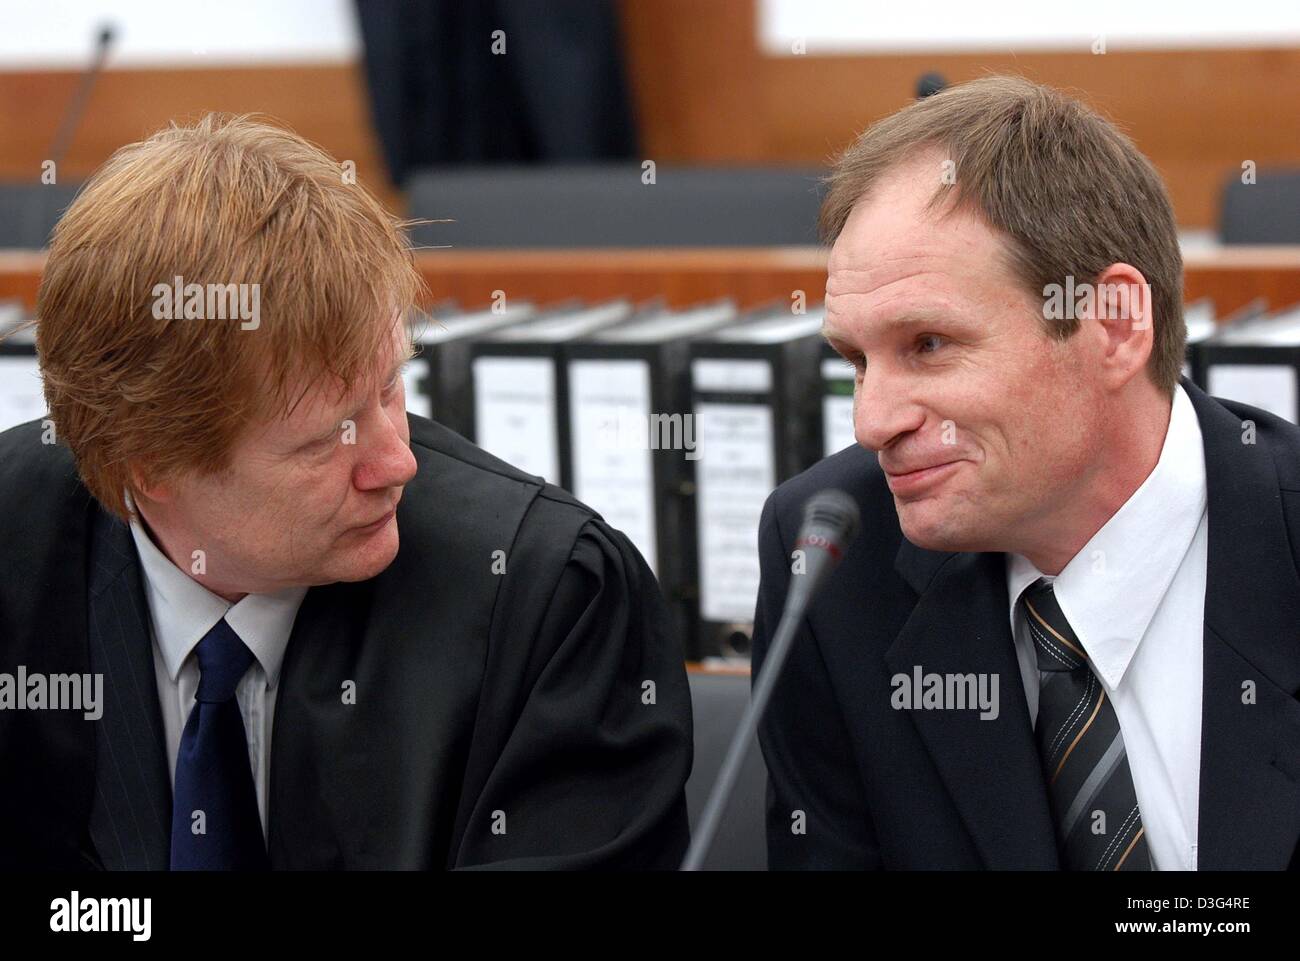 (dpa) - 42-year-old German computer specialist Armin Meiwes (R) chats with his lawyer Harald Ermel during his trial at the district court in Kassel, Germany, 12 December 2003. The German murder trial of the self-declared cannibal will hear evidence on 12 December of the effects of alcohol and medication on his victim. A toxicologist will give testimony on the third day of the trial Stock Photo